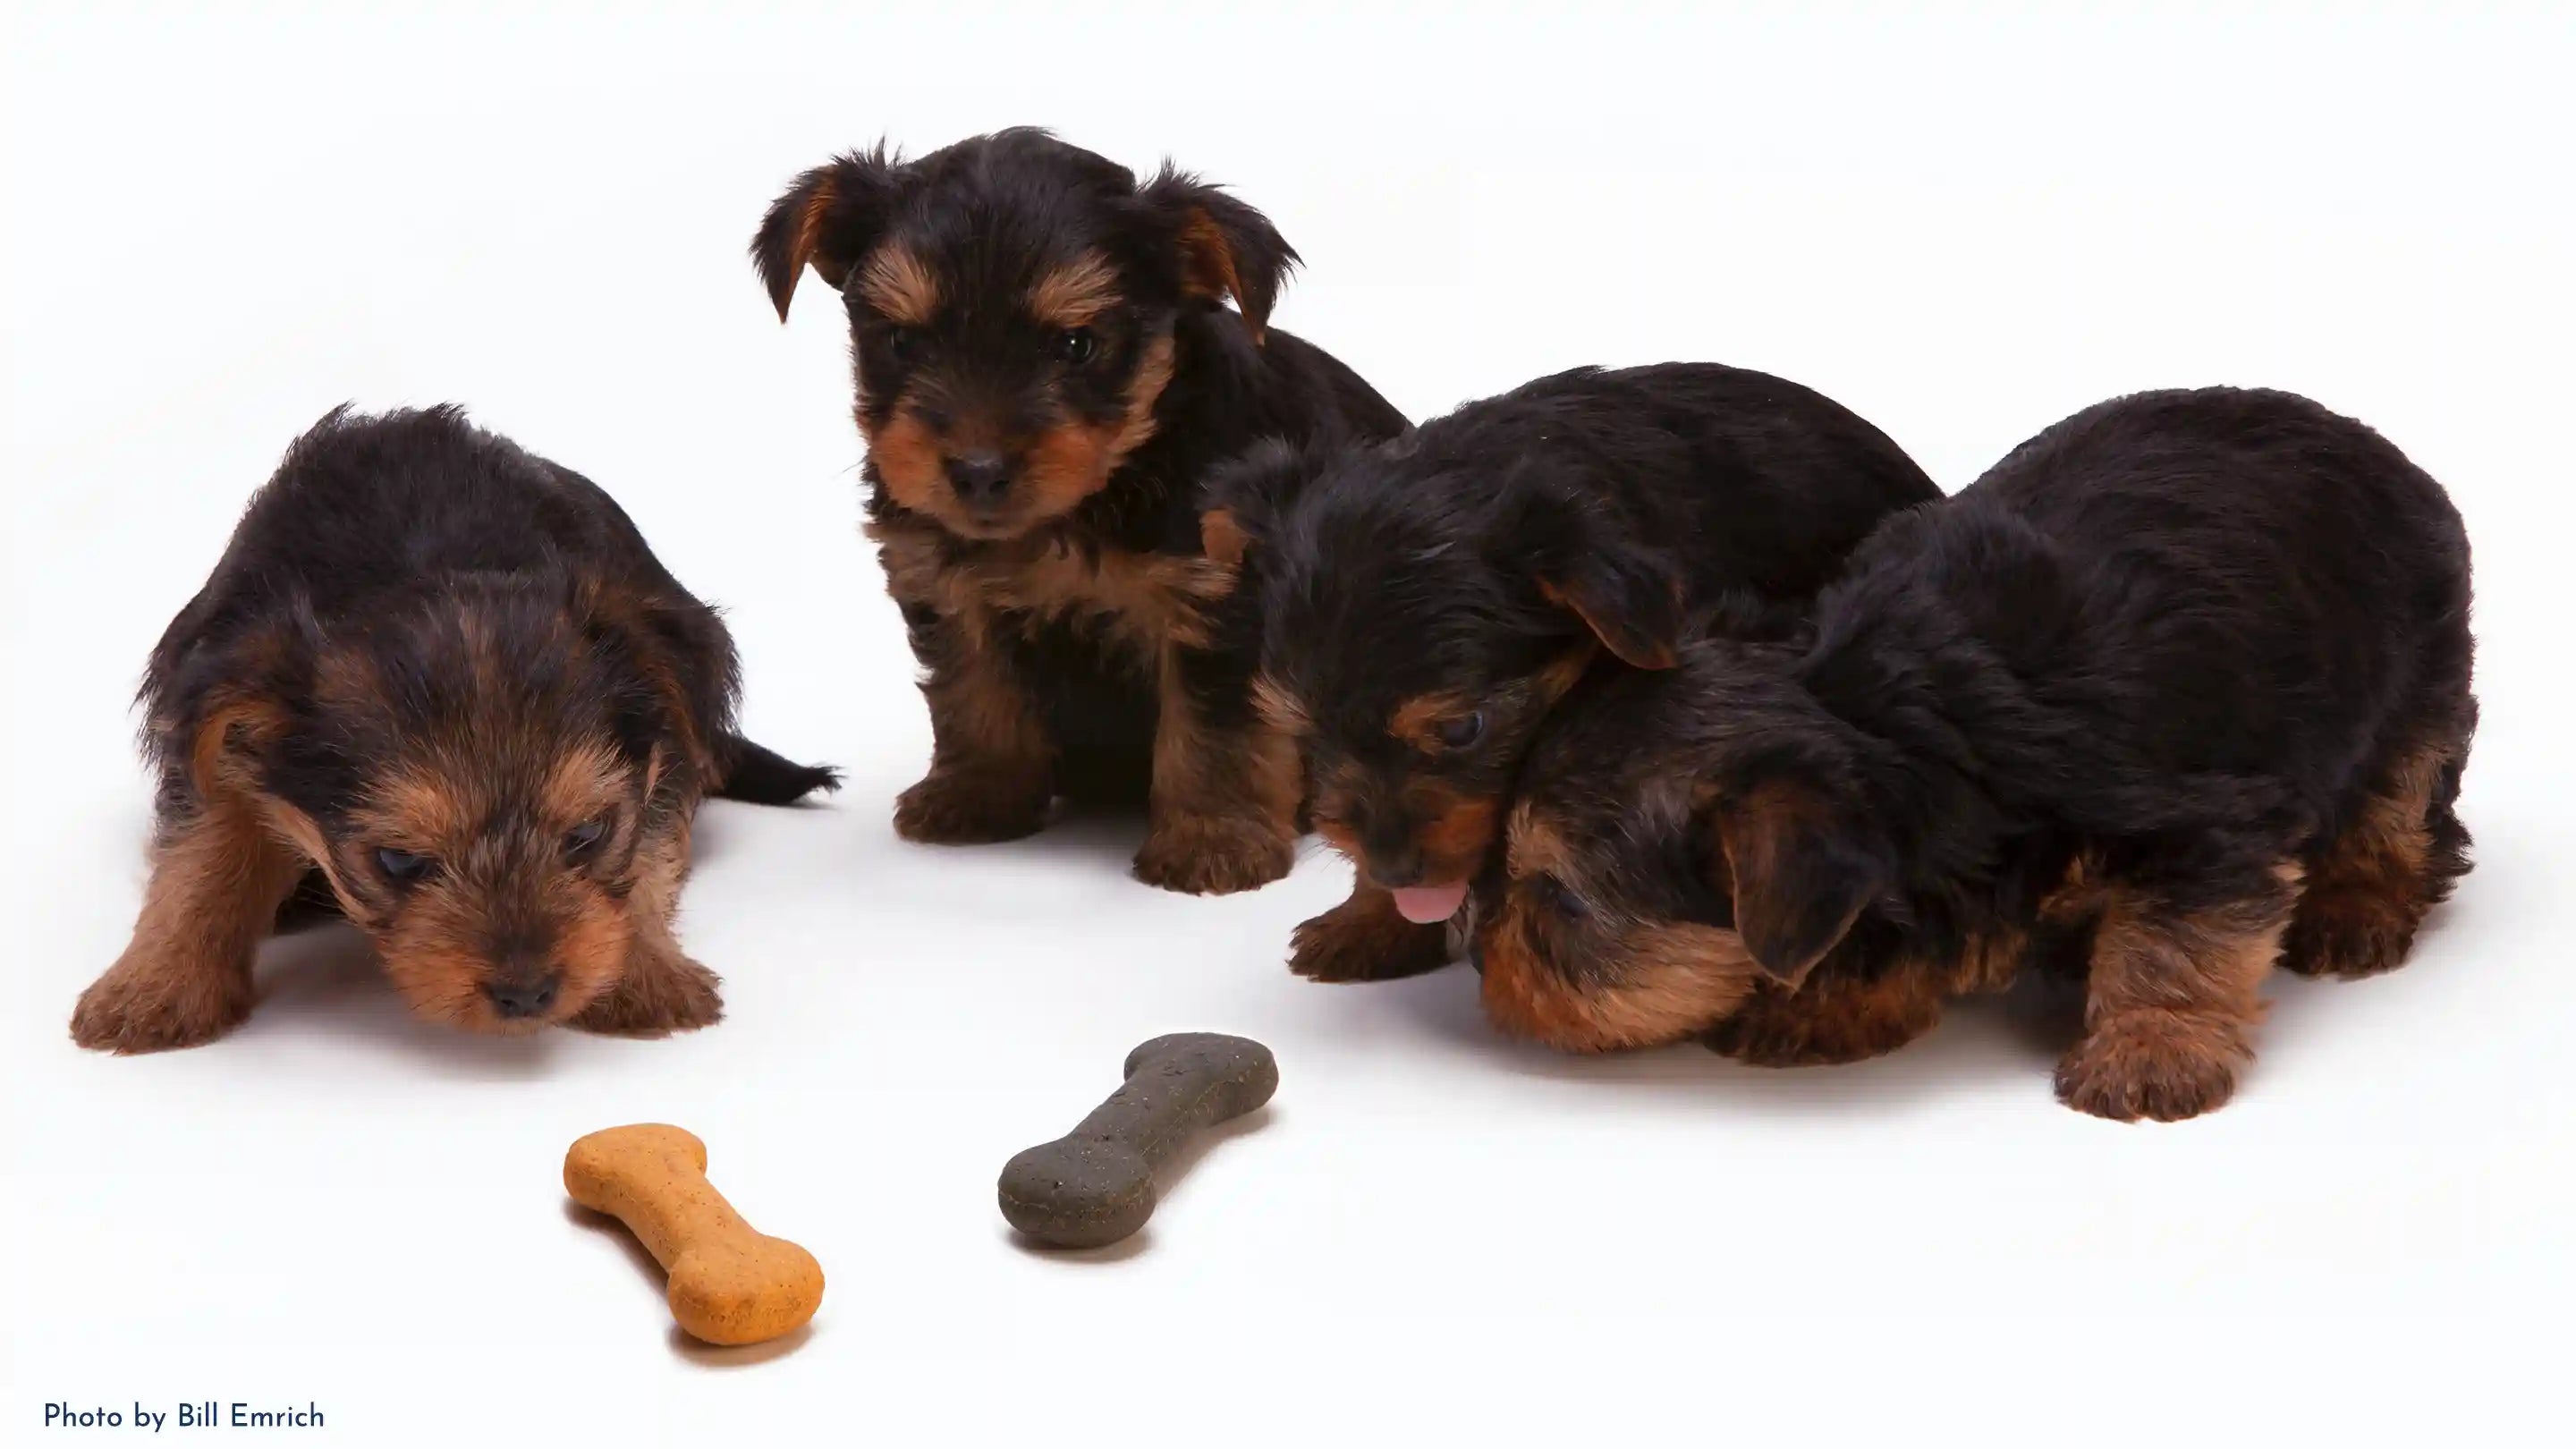 four puppies looking at two dog treats on a white background.